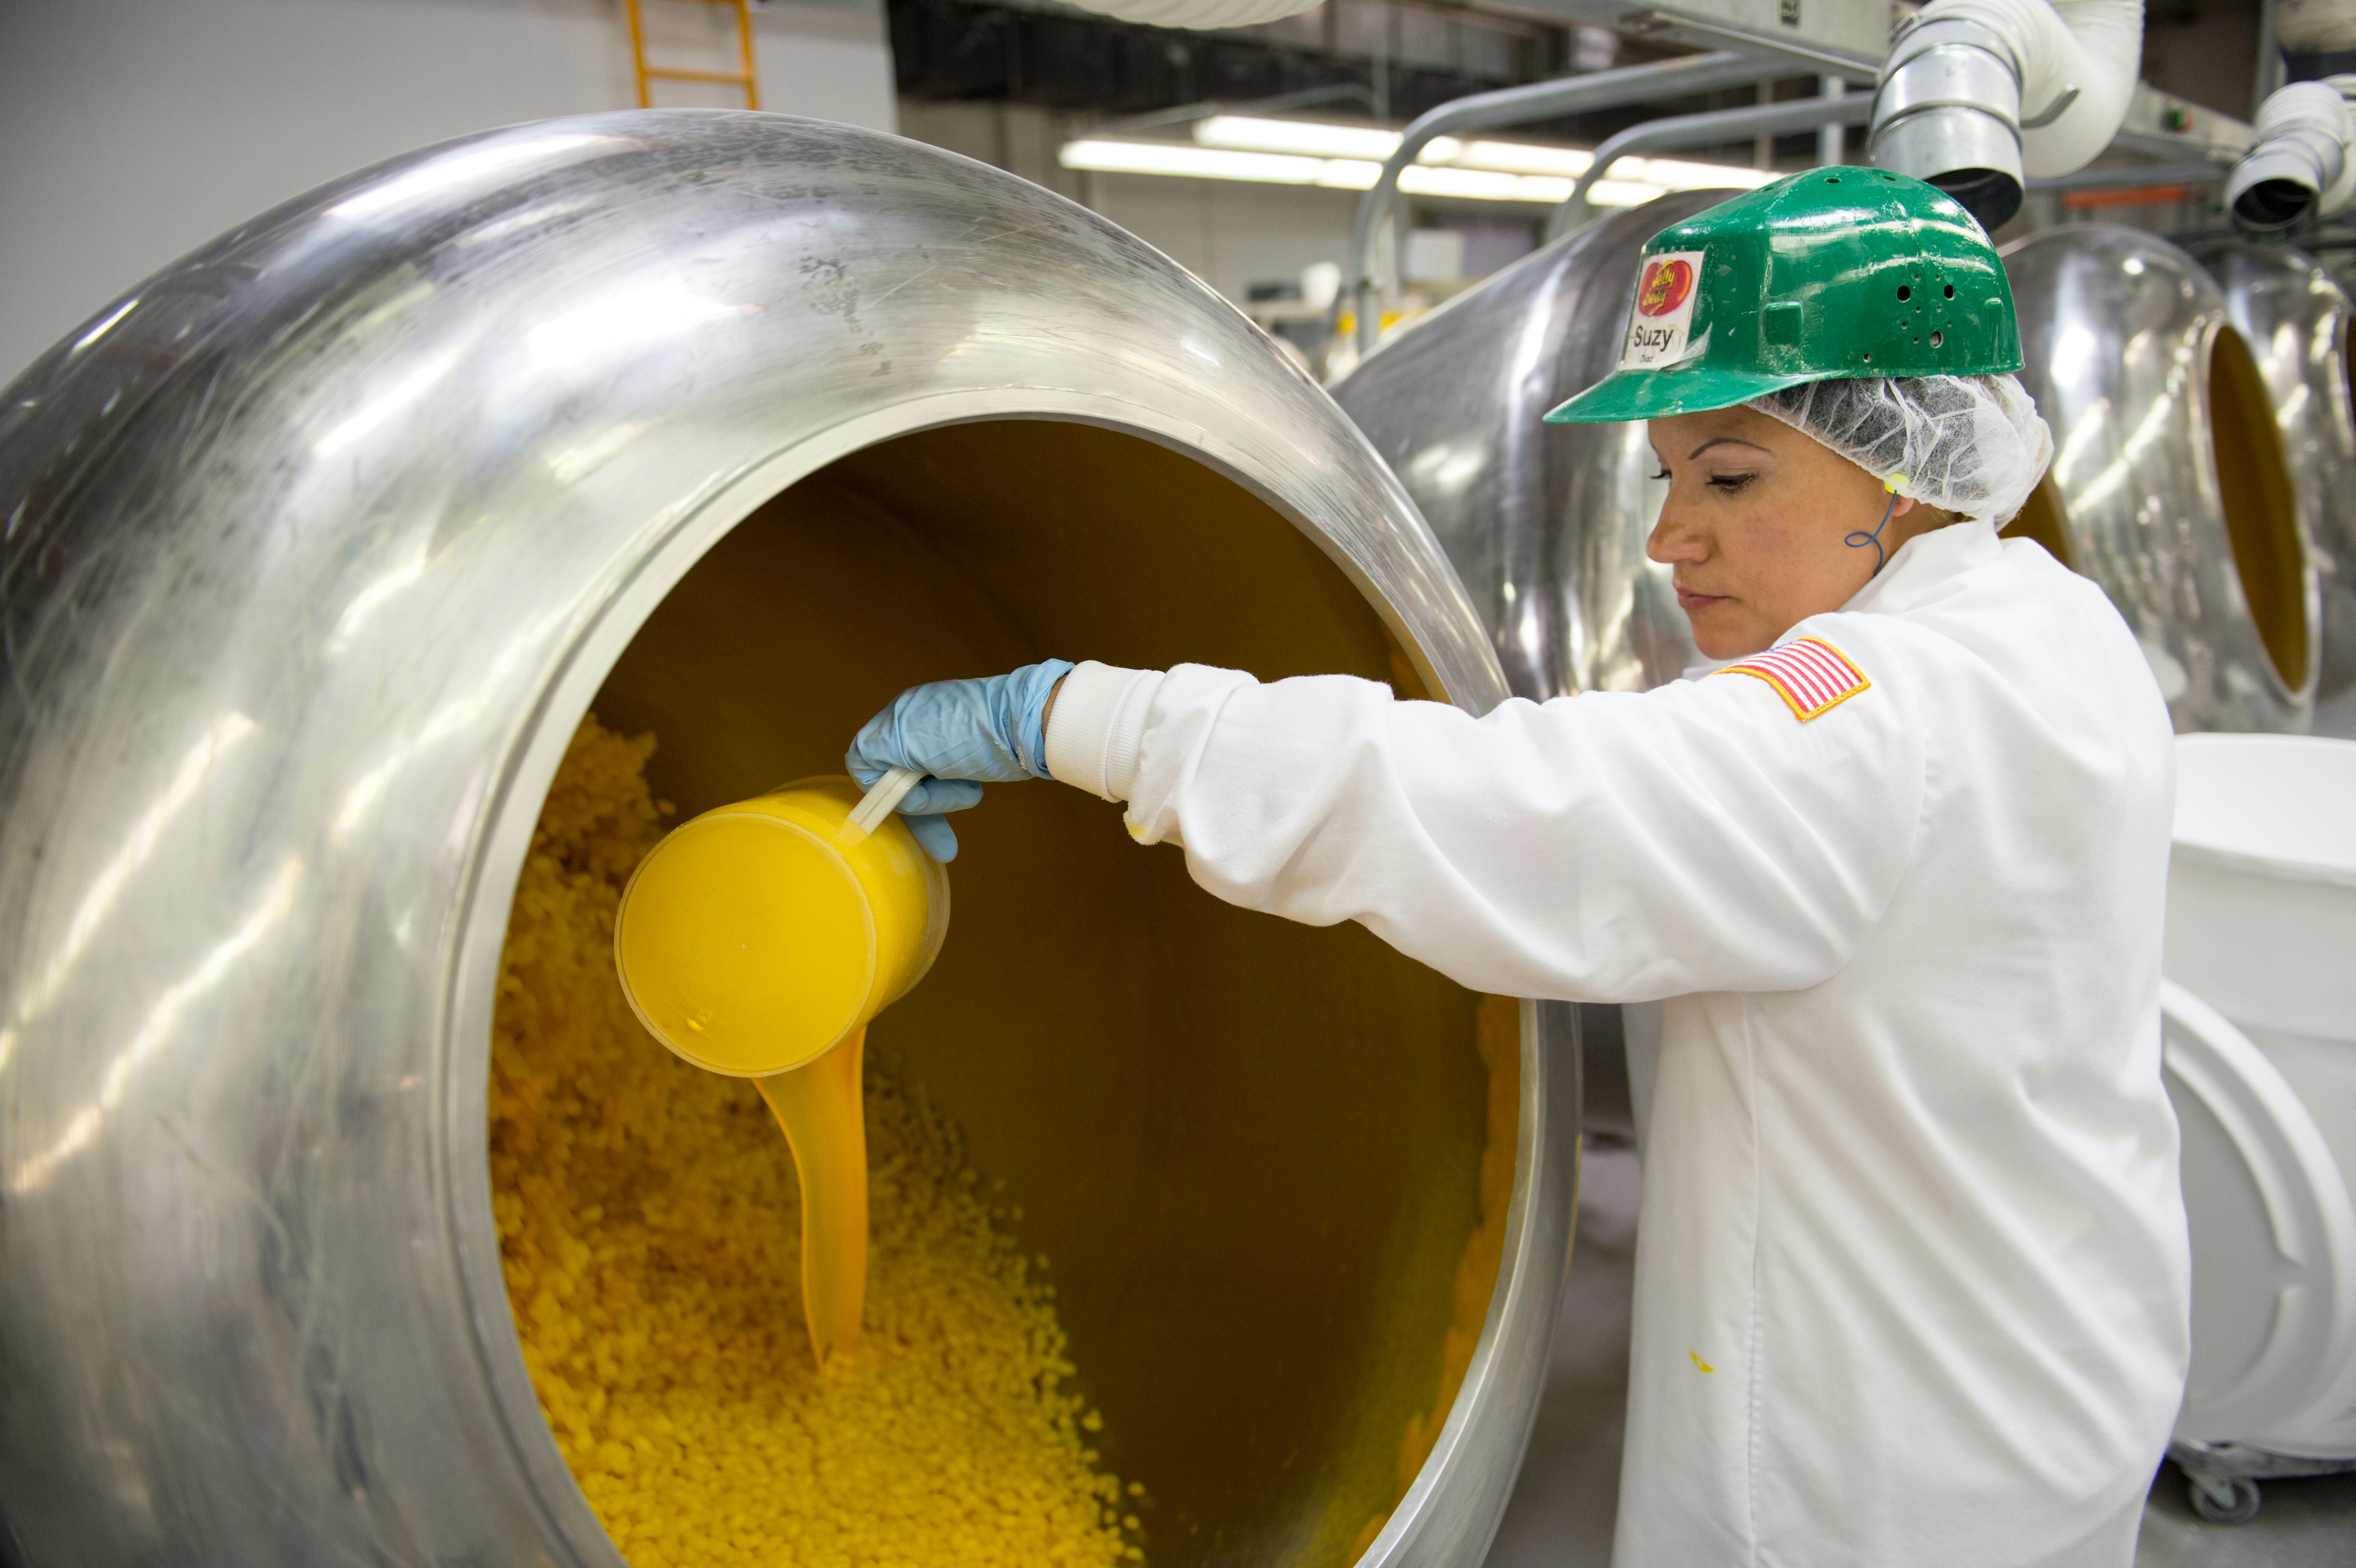 A woman in a sterile suit pours yellow liquid into a batch of jelly beans